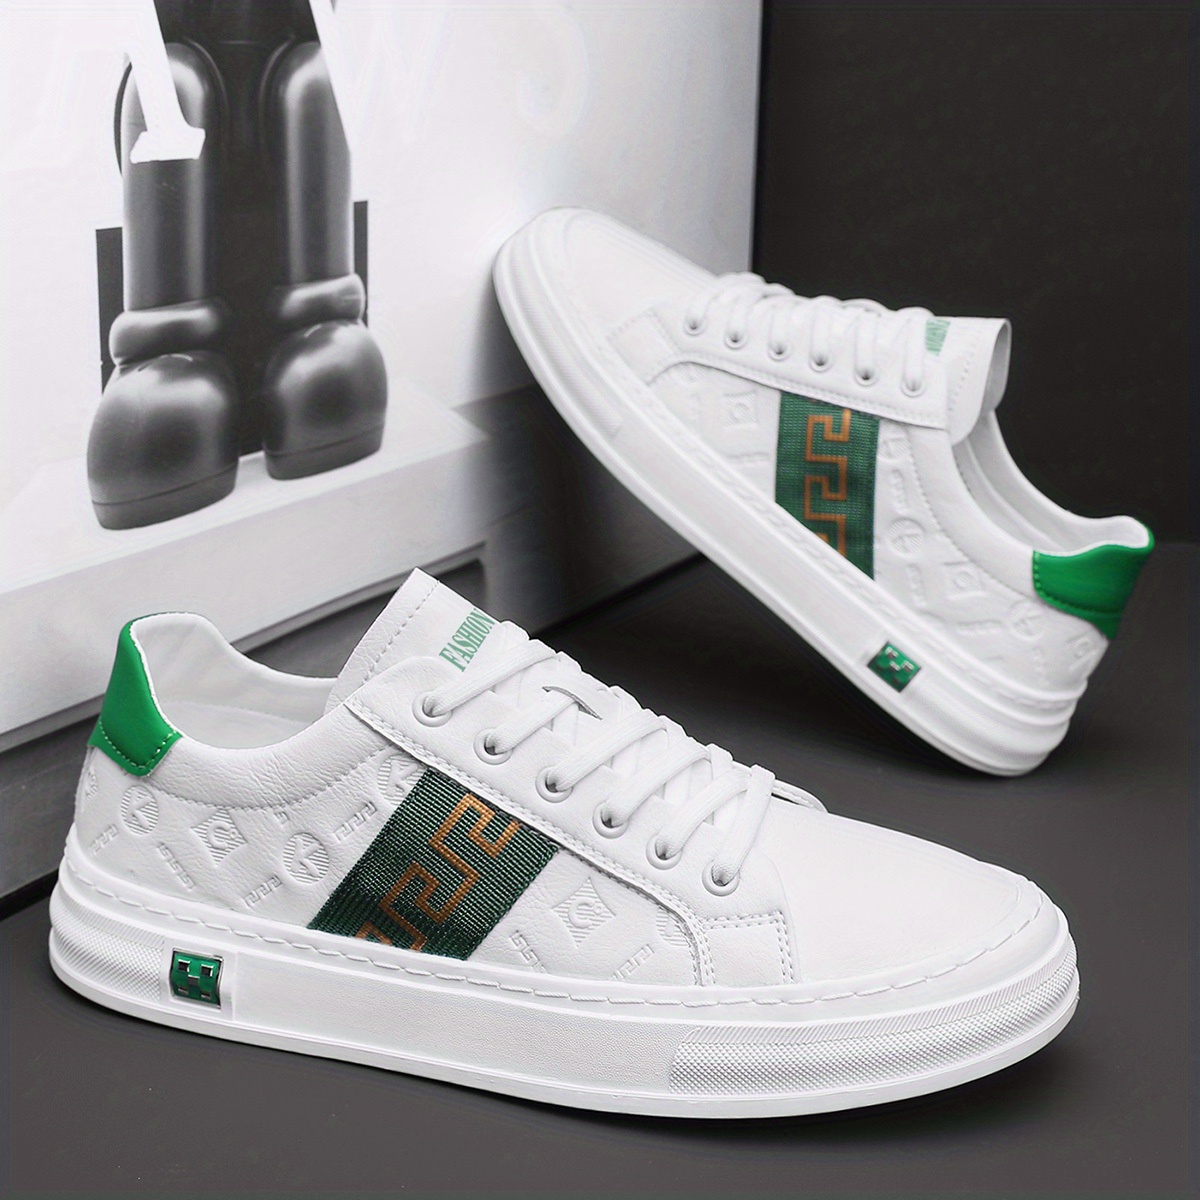 New LV men's casual shoes, Men's Fashion, Footwear, Sneakers on